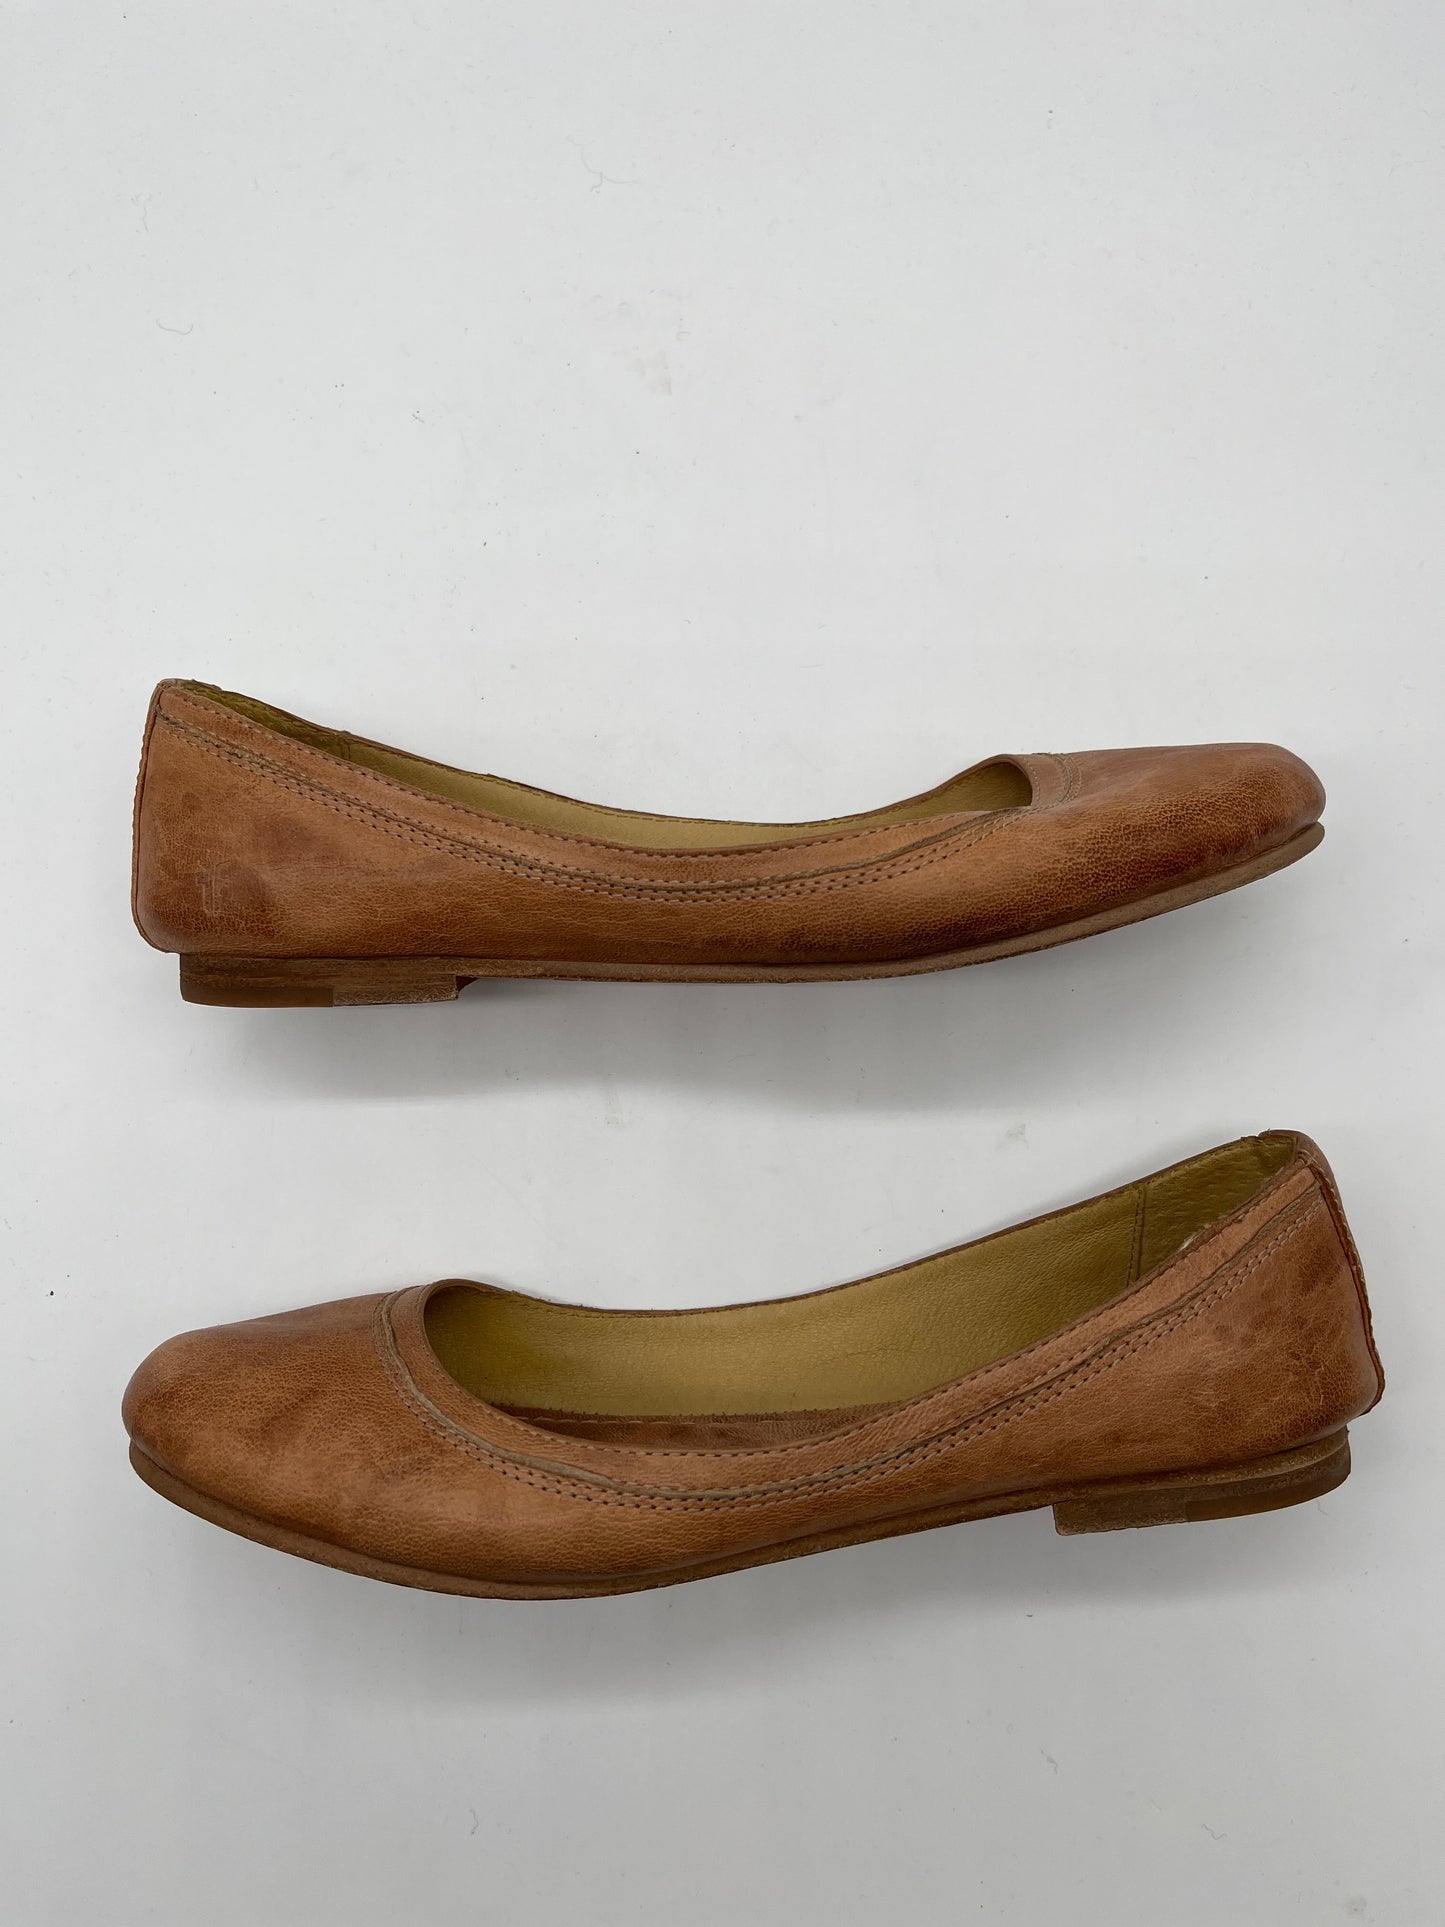 Brown Shoes Flats Frye, Size 8.5